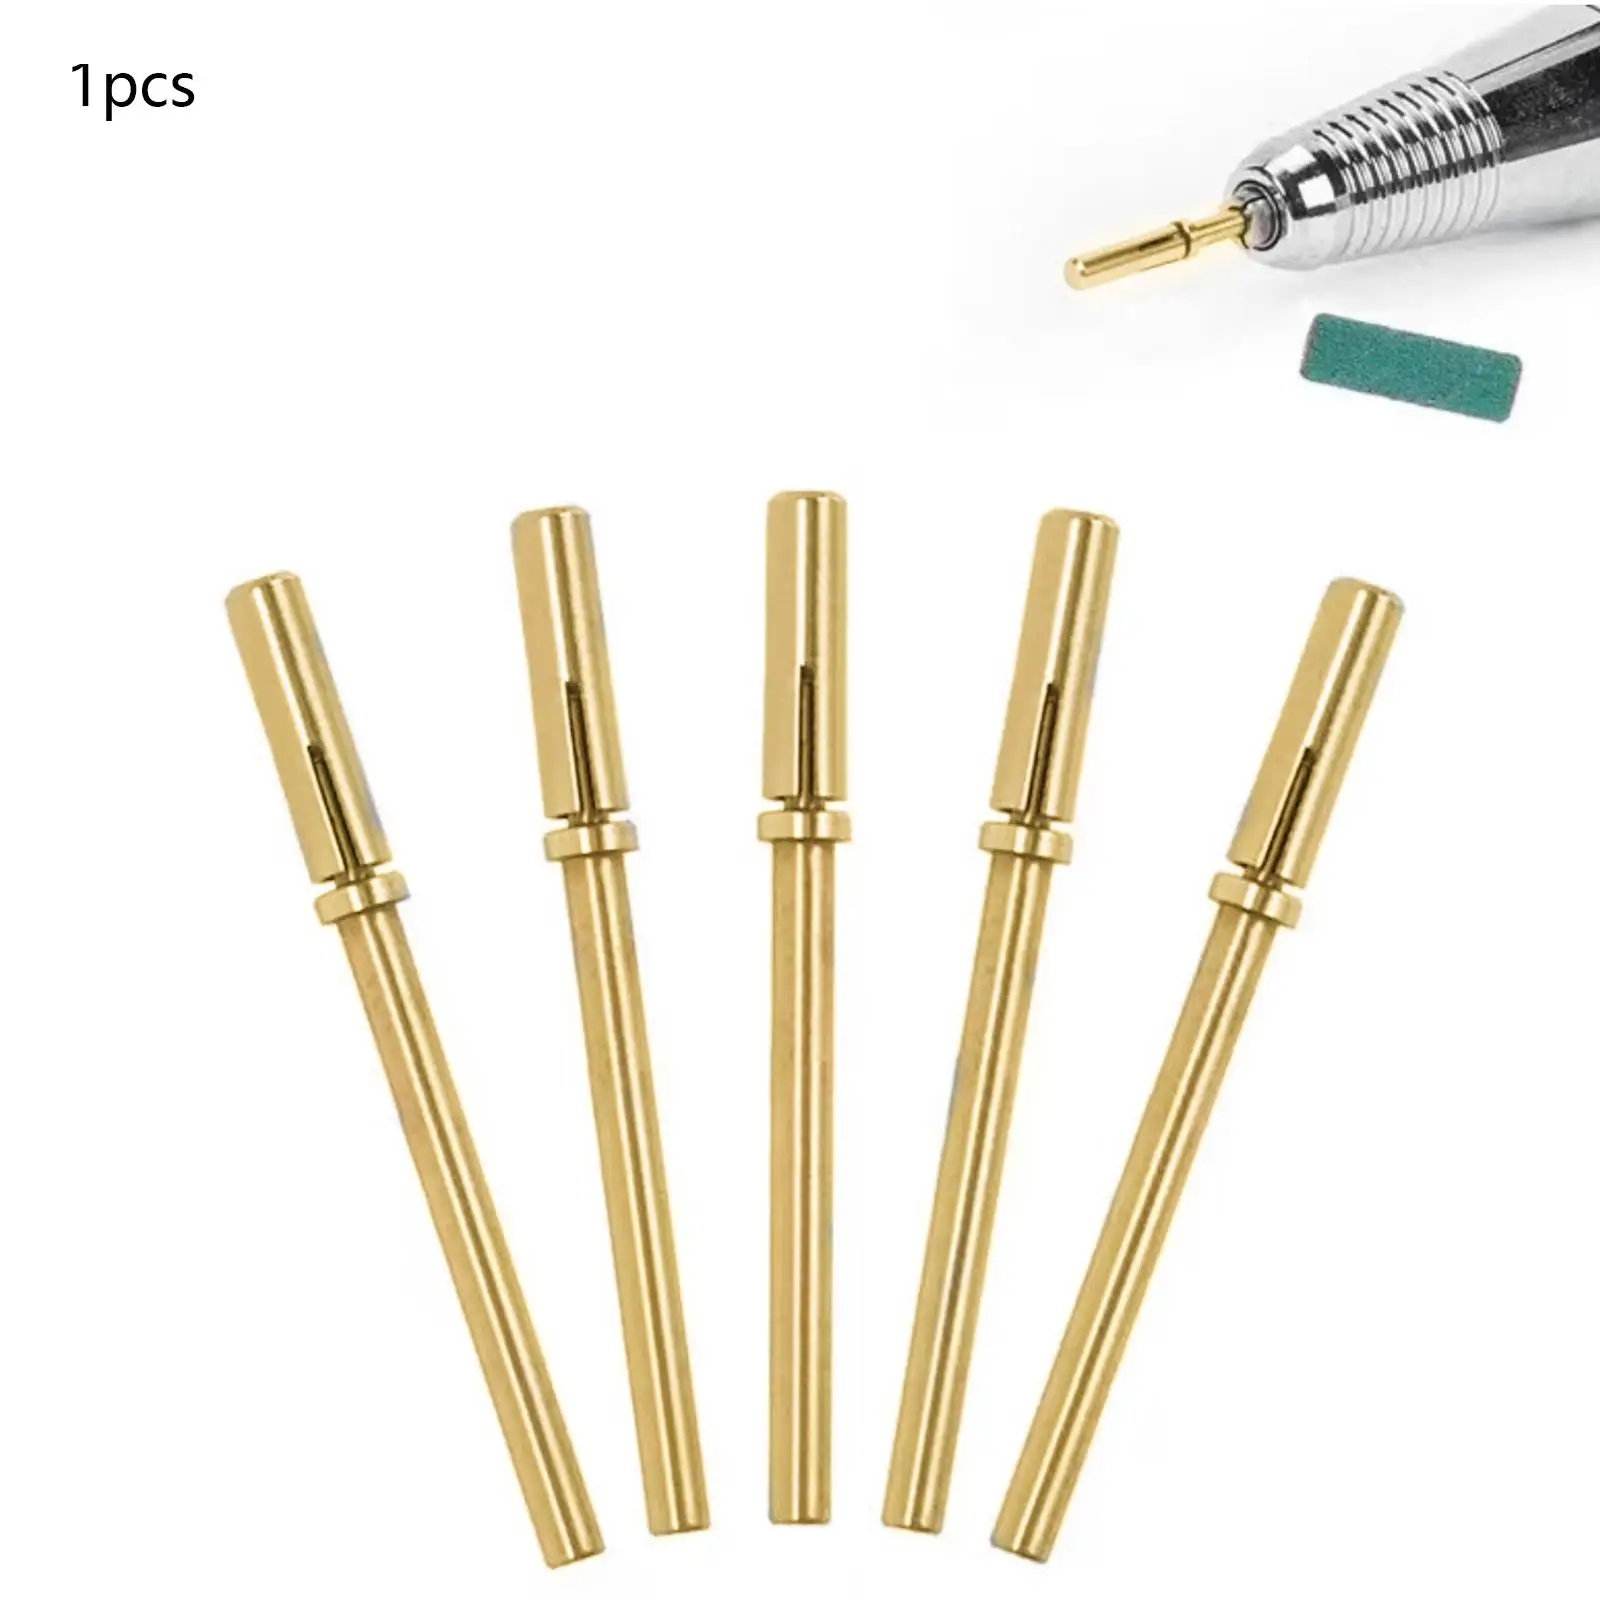 Sanding Bands Nail Drill 3.1mm Nail Drill Heads for Electric File Manicure Pedicure Polishing Grinding Nail Art Salon